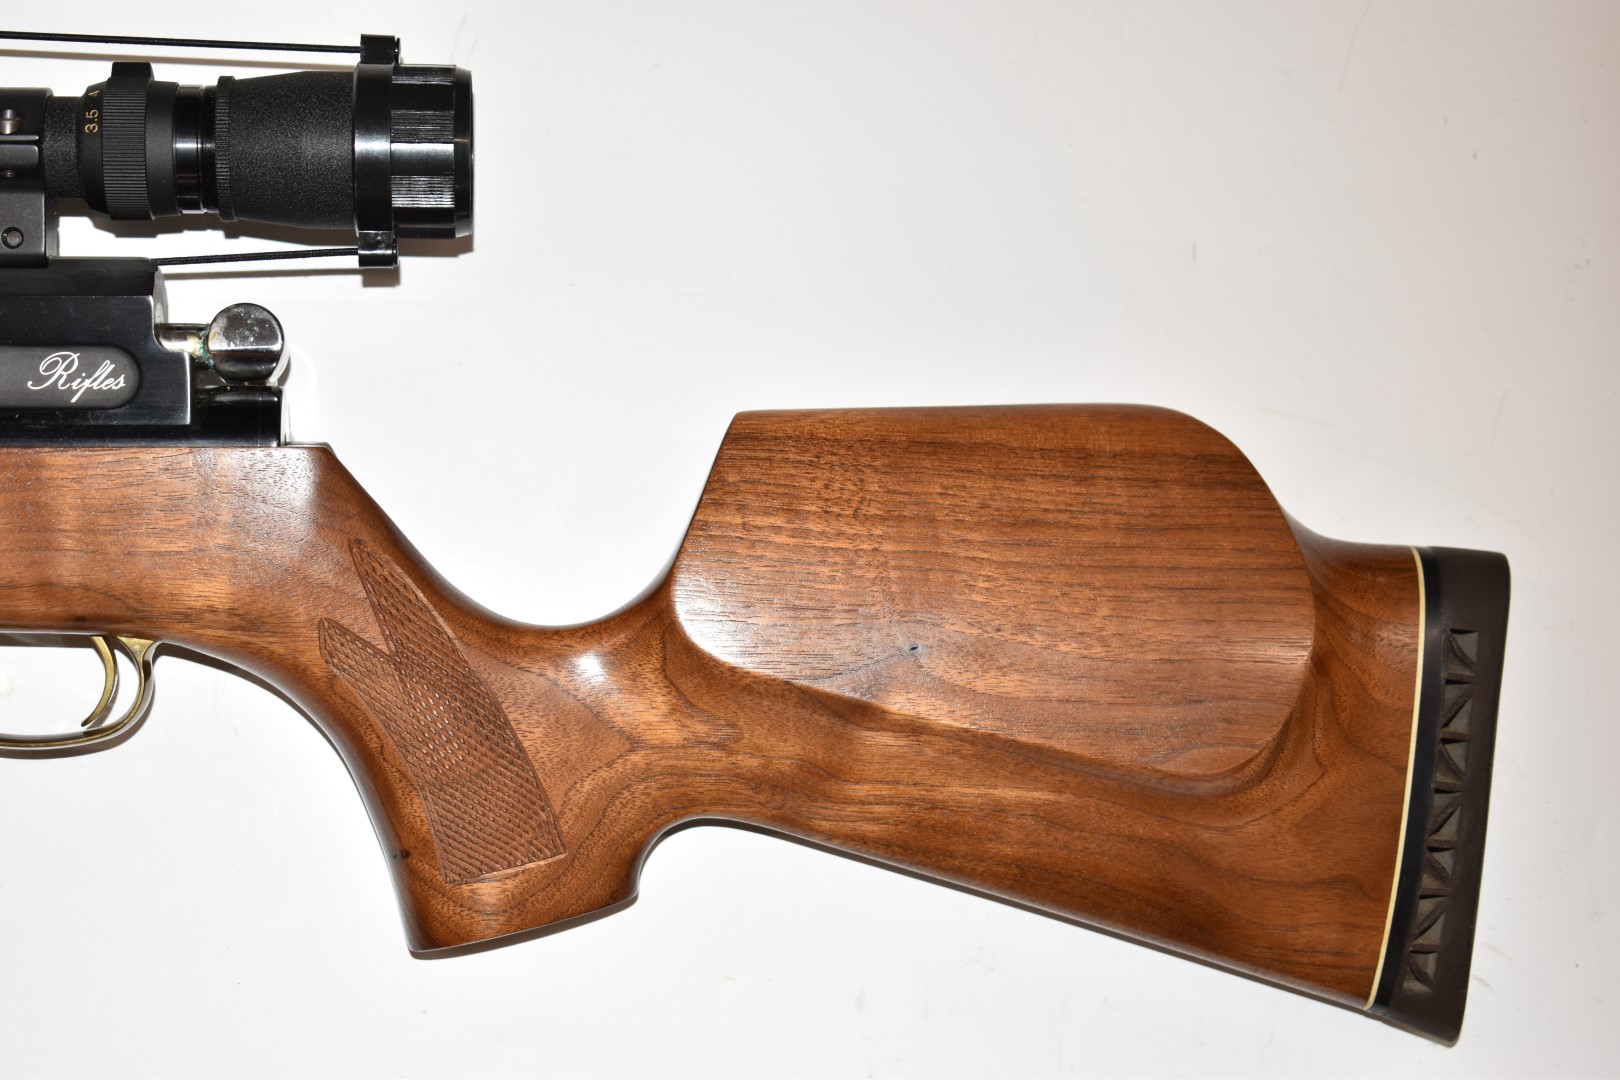 Ripley Rifles XL9 .22 PCP air rifle with nine shot magazine, chequered semi-pistol grip and - Image 8 of 10